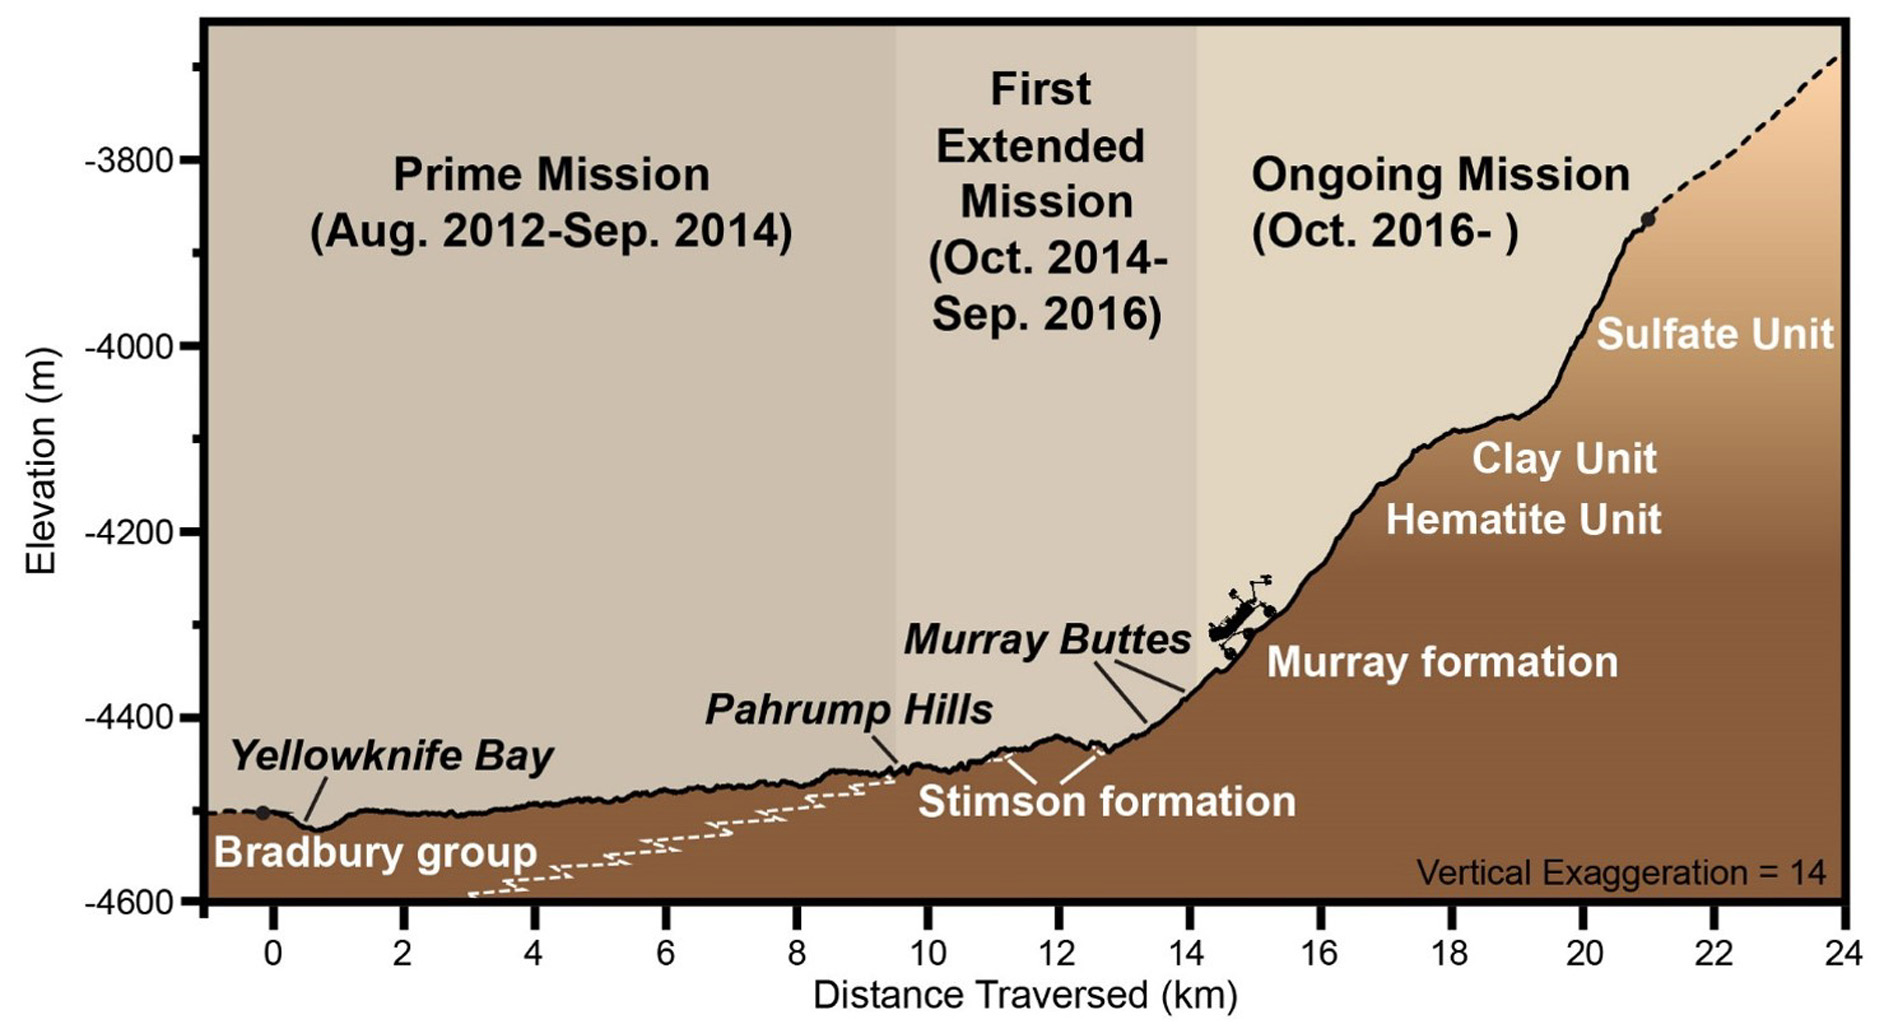 Illustration of Curiosity’s mission so far with distance traveled and compositions of various rock formations. Image Credit: NASA/JPL-Caltech